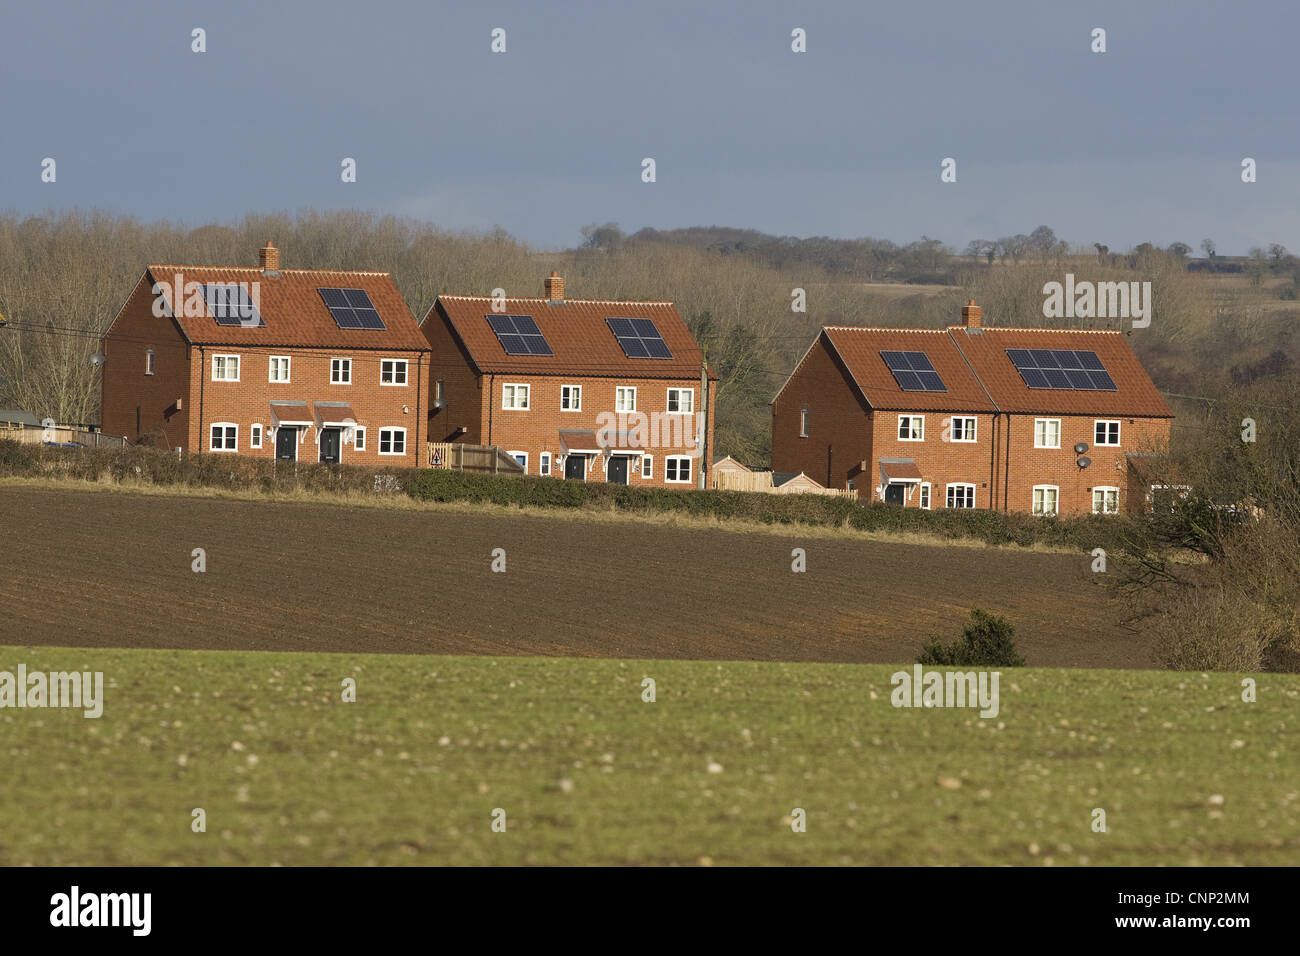 Houses with solar water heating panels on roof, Norfolk, England, march Stock Photo